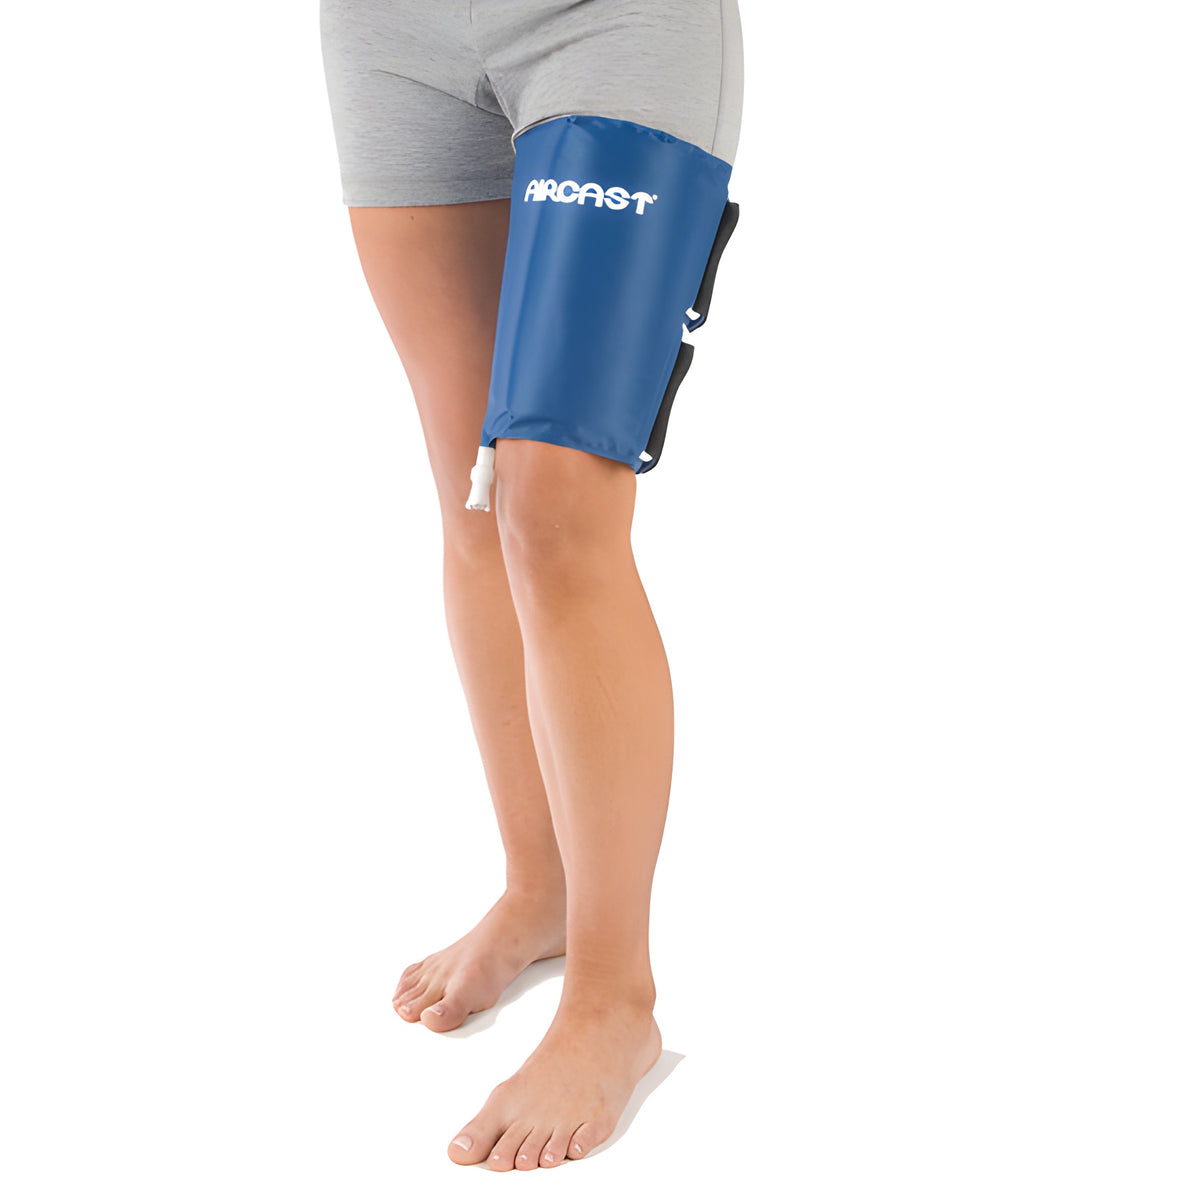 Aircast Cryo Cooler System - Thigh